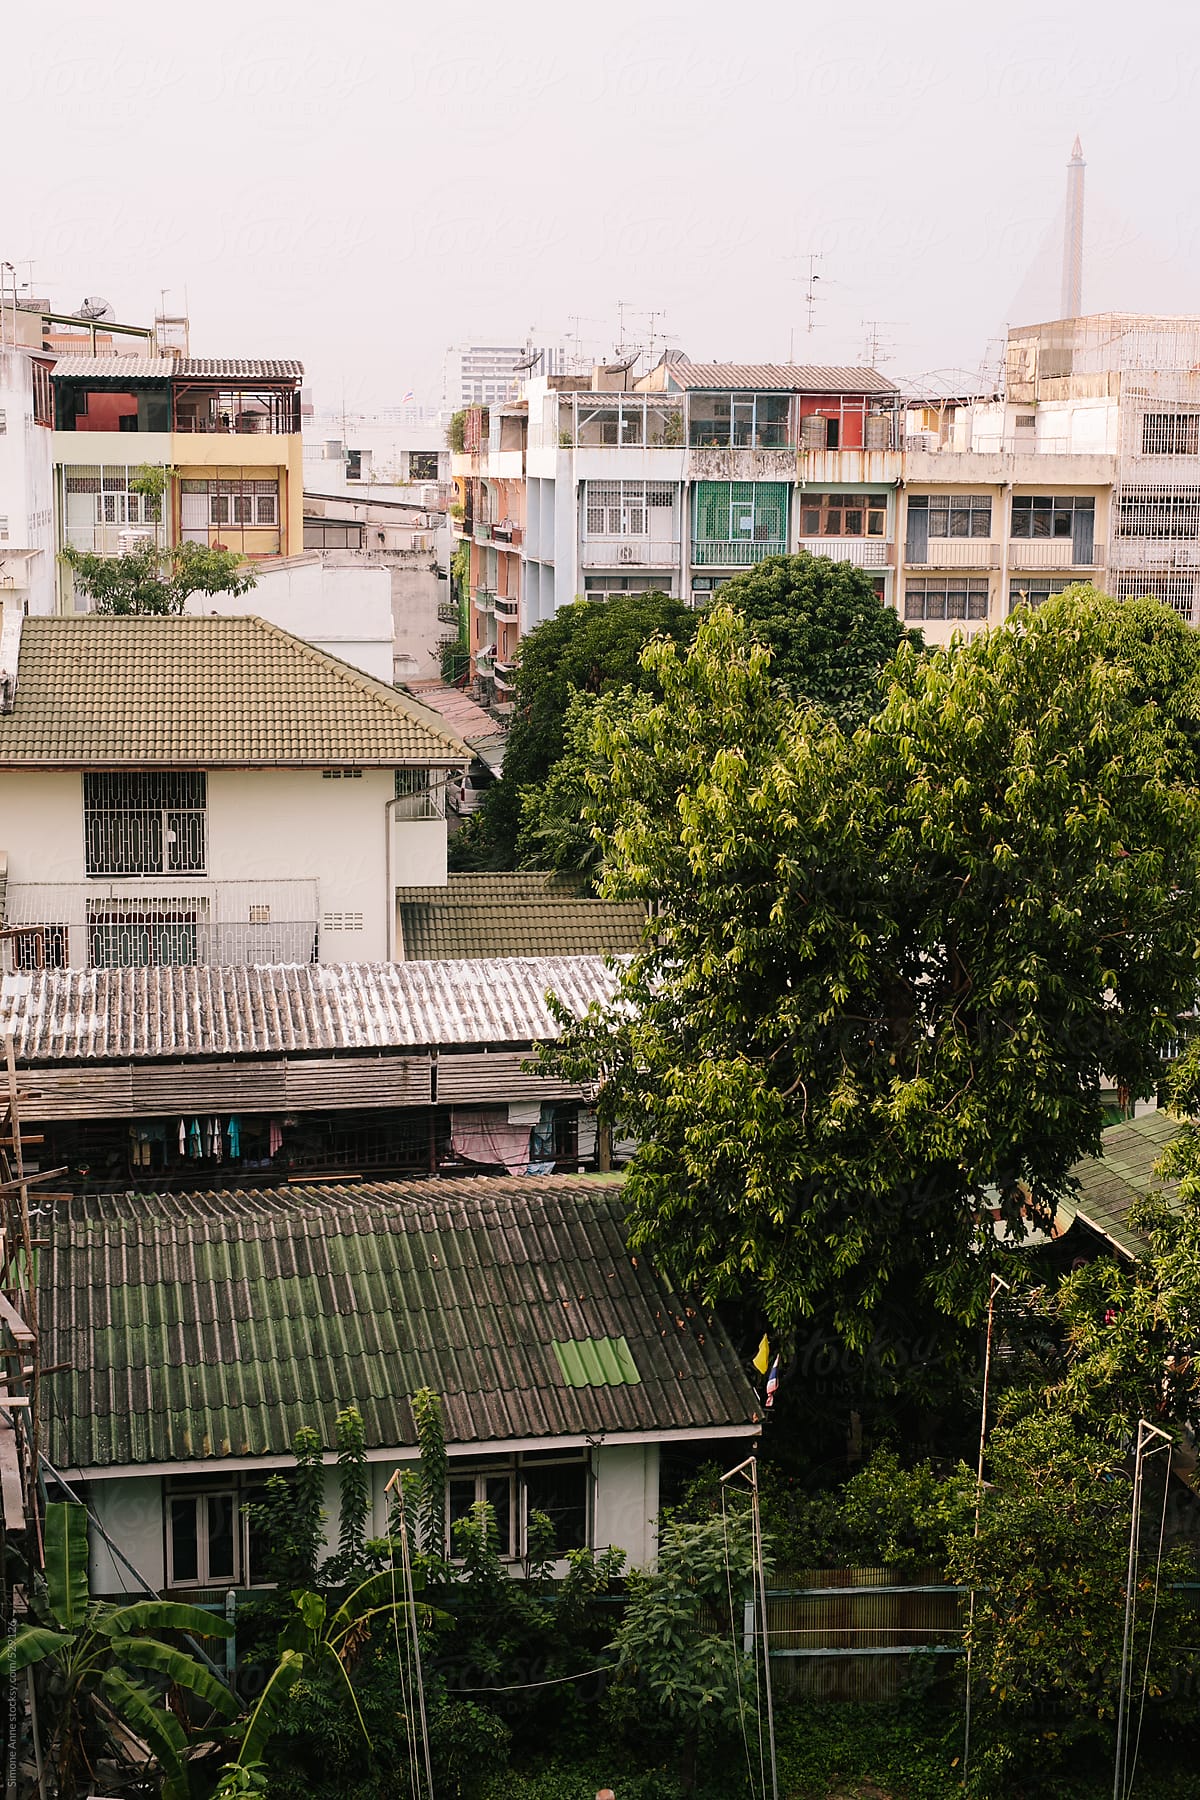 View of verdant Thai street from above